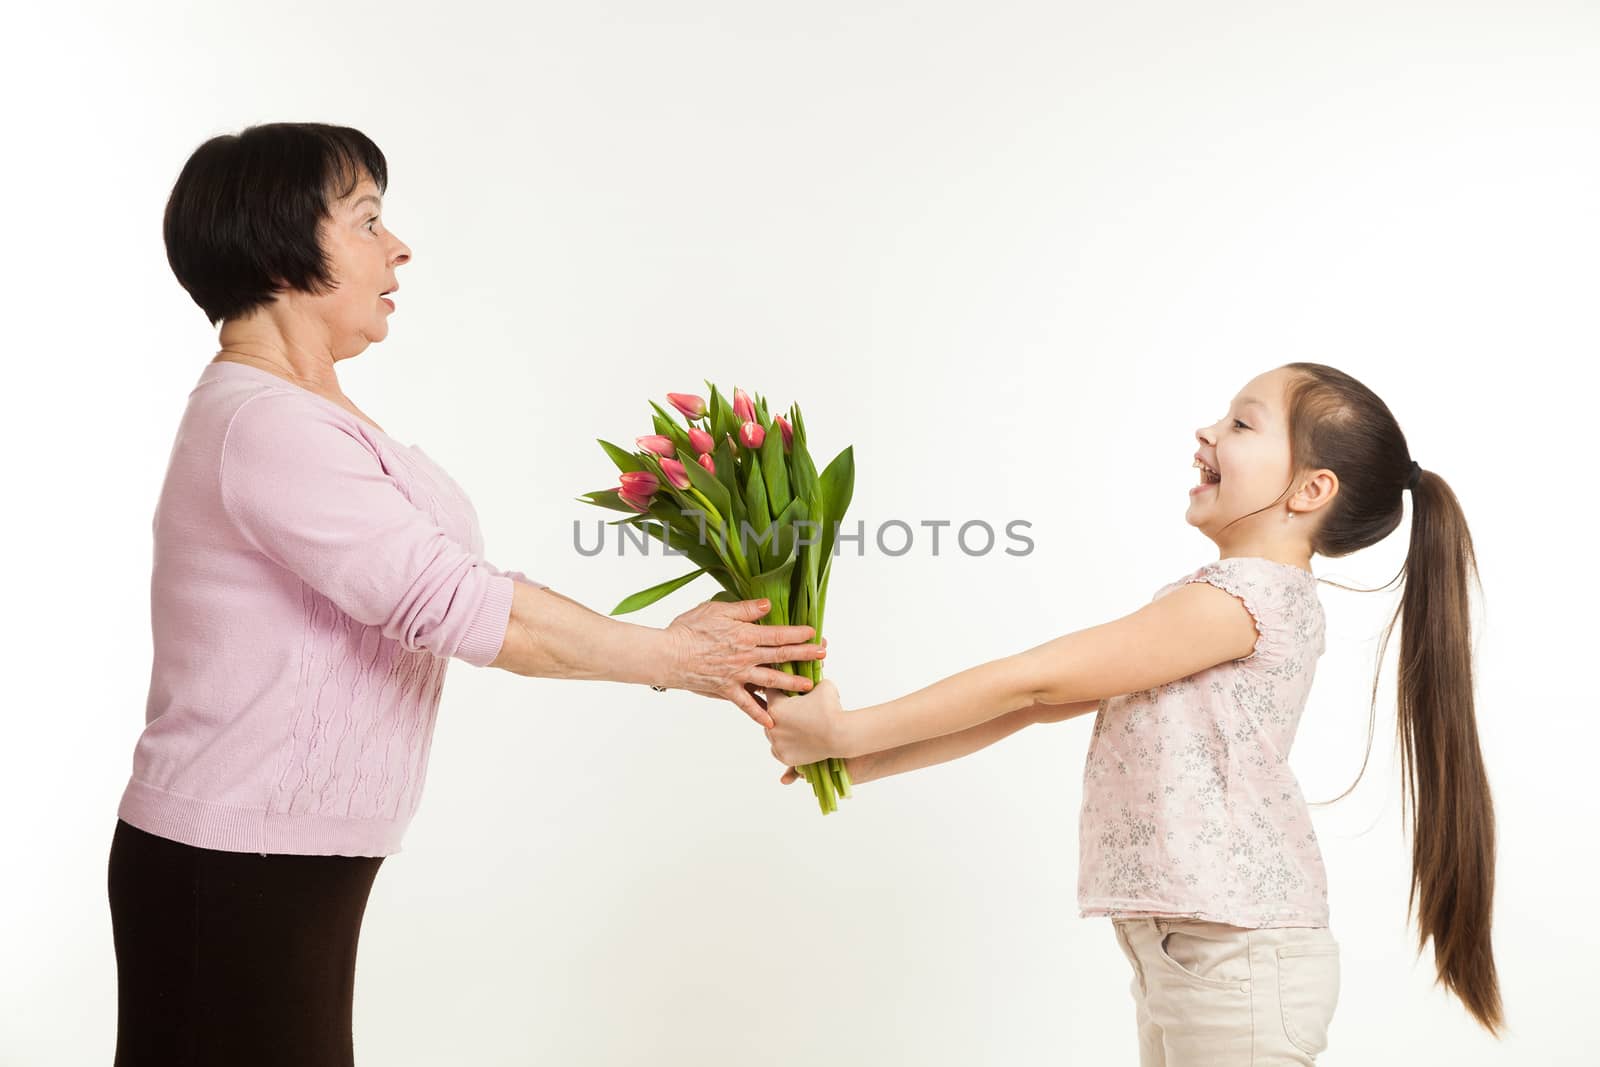 the granddaughter congratulates the grandmother and gives it flowers